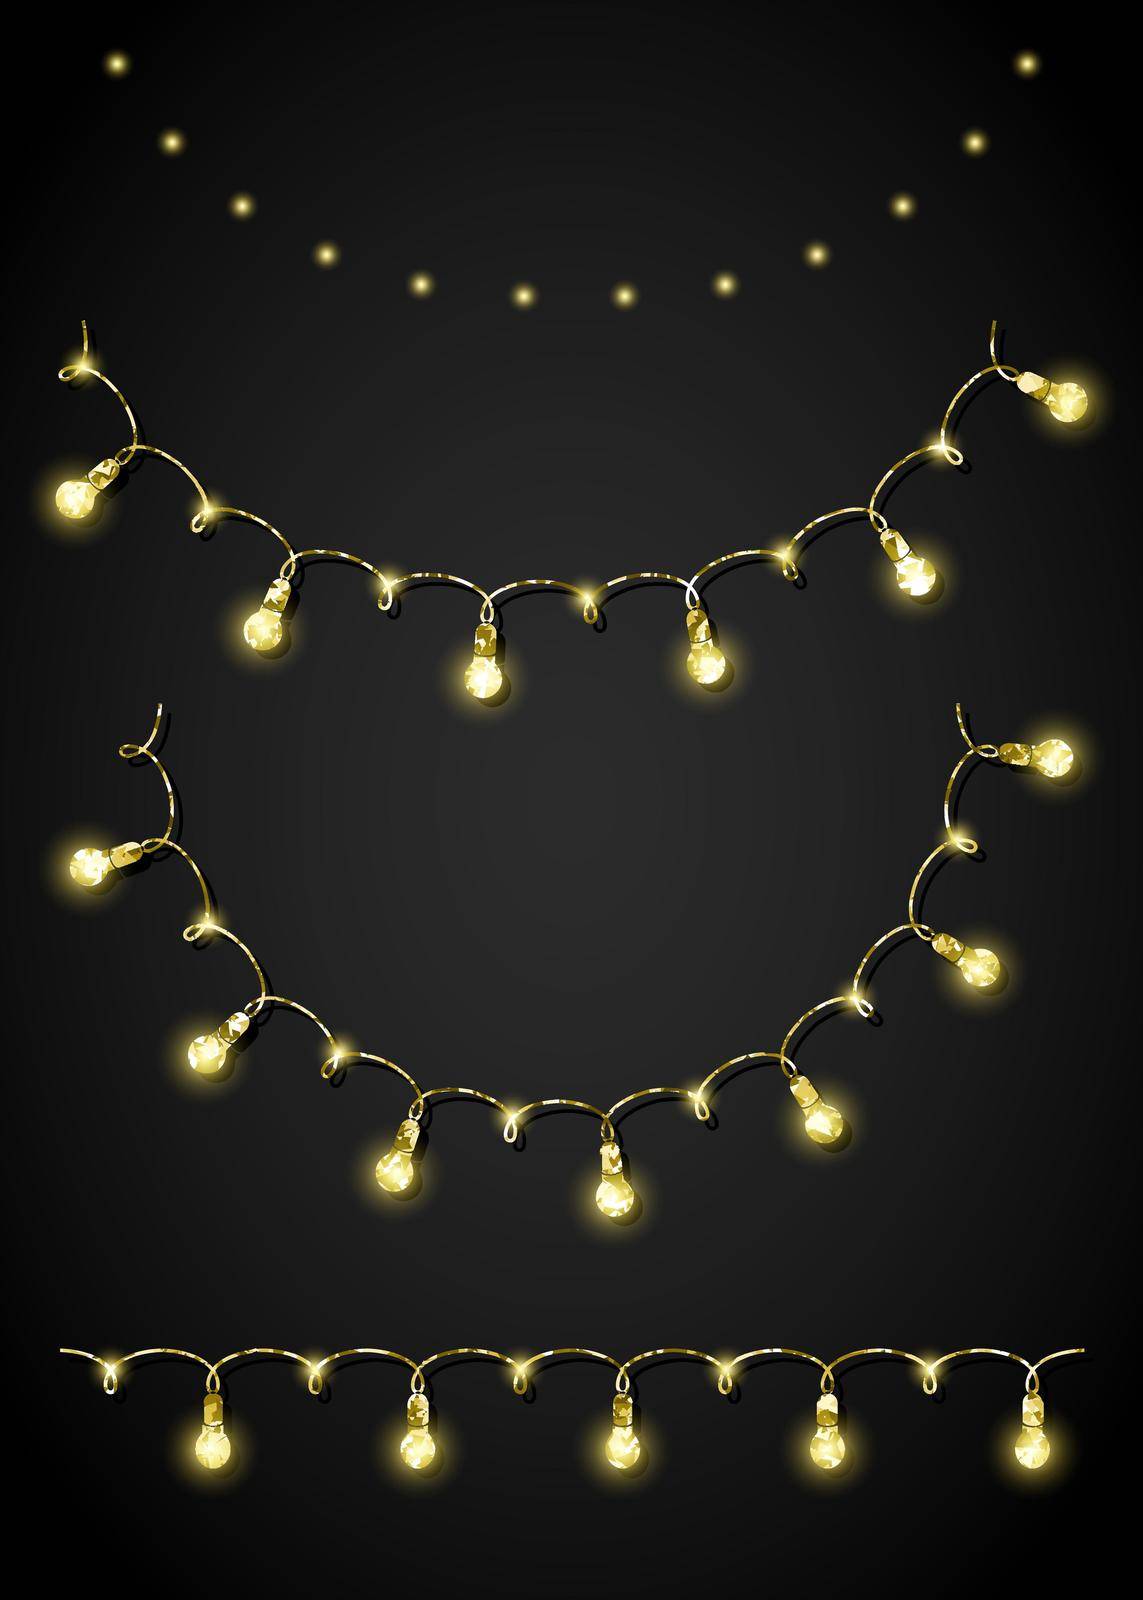 Glitter festoon and garland. Vector elements for party design in glamour style